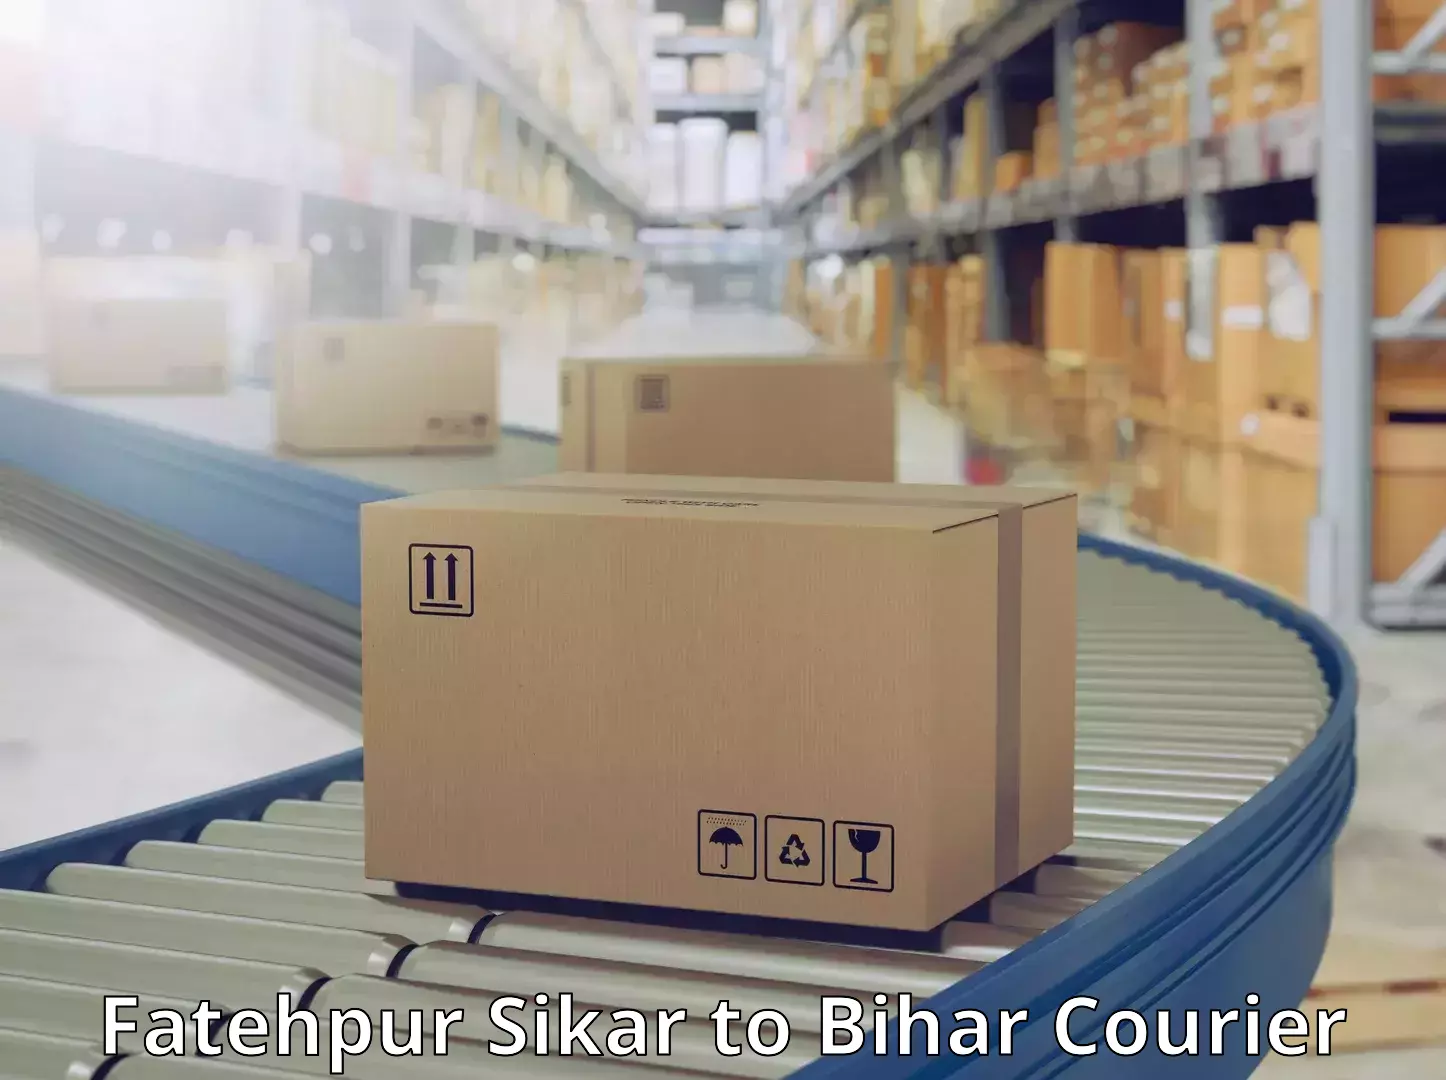 Next-day delivery options Fatehpur Sikar to Bihar